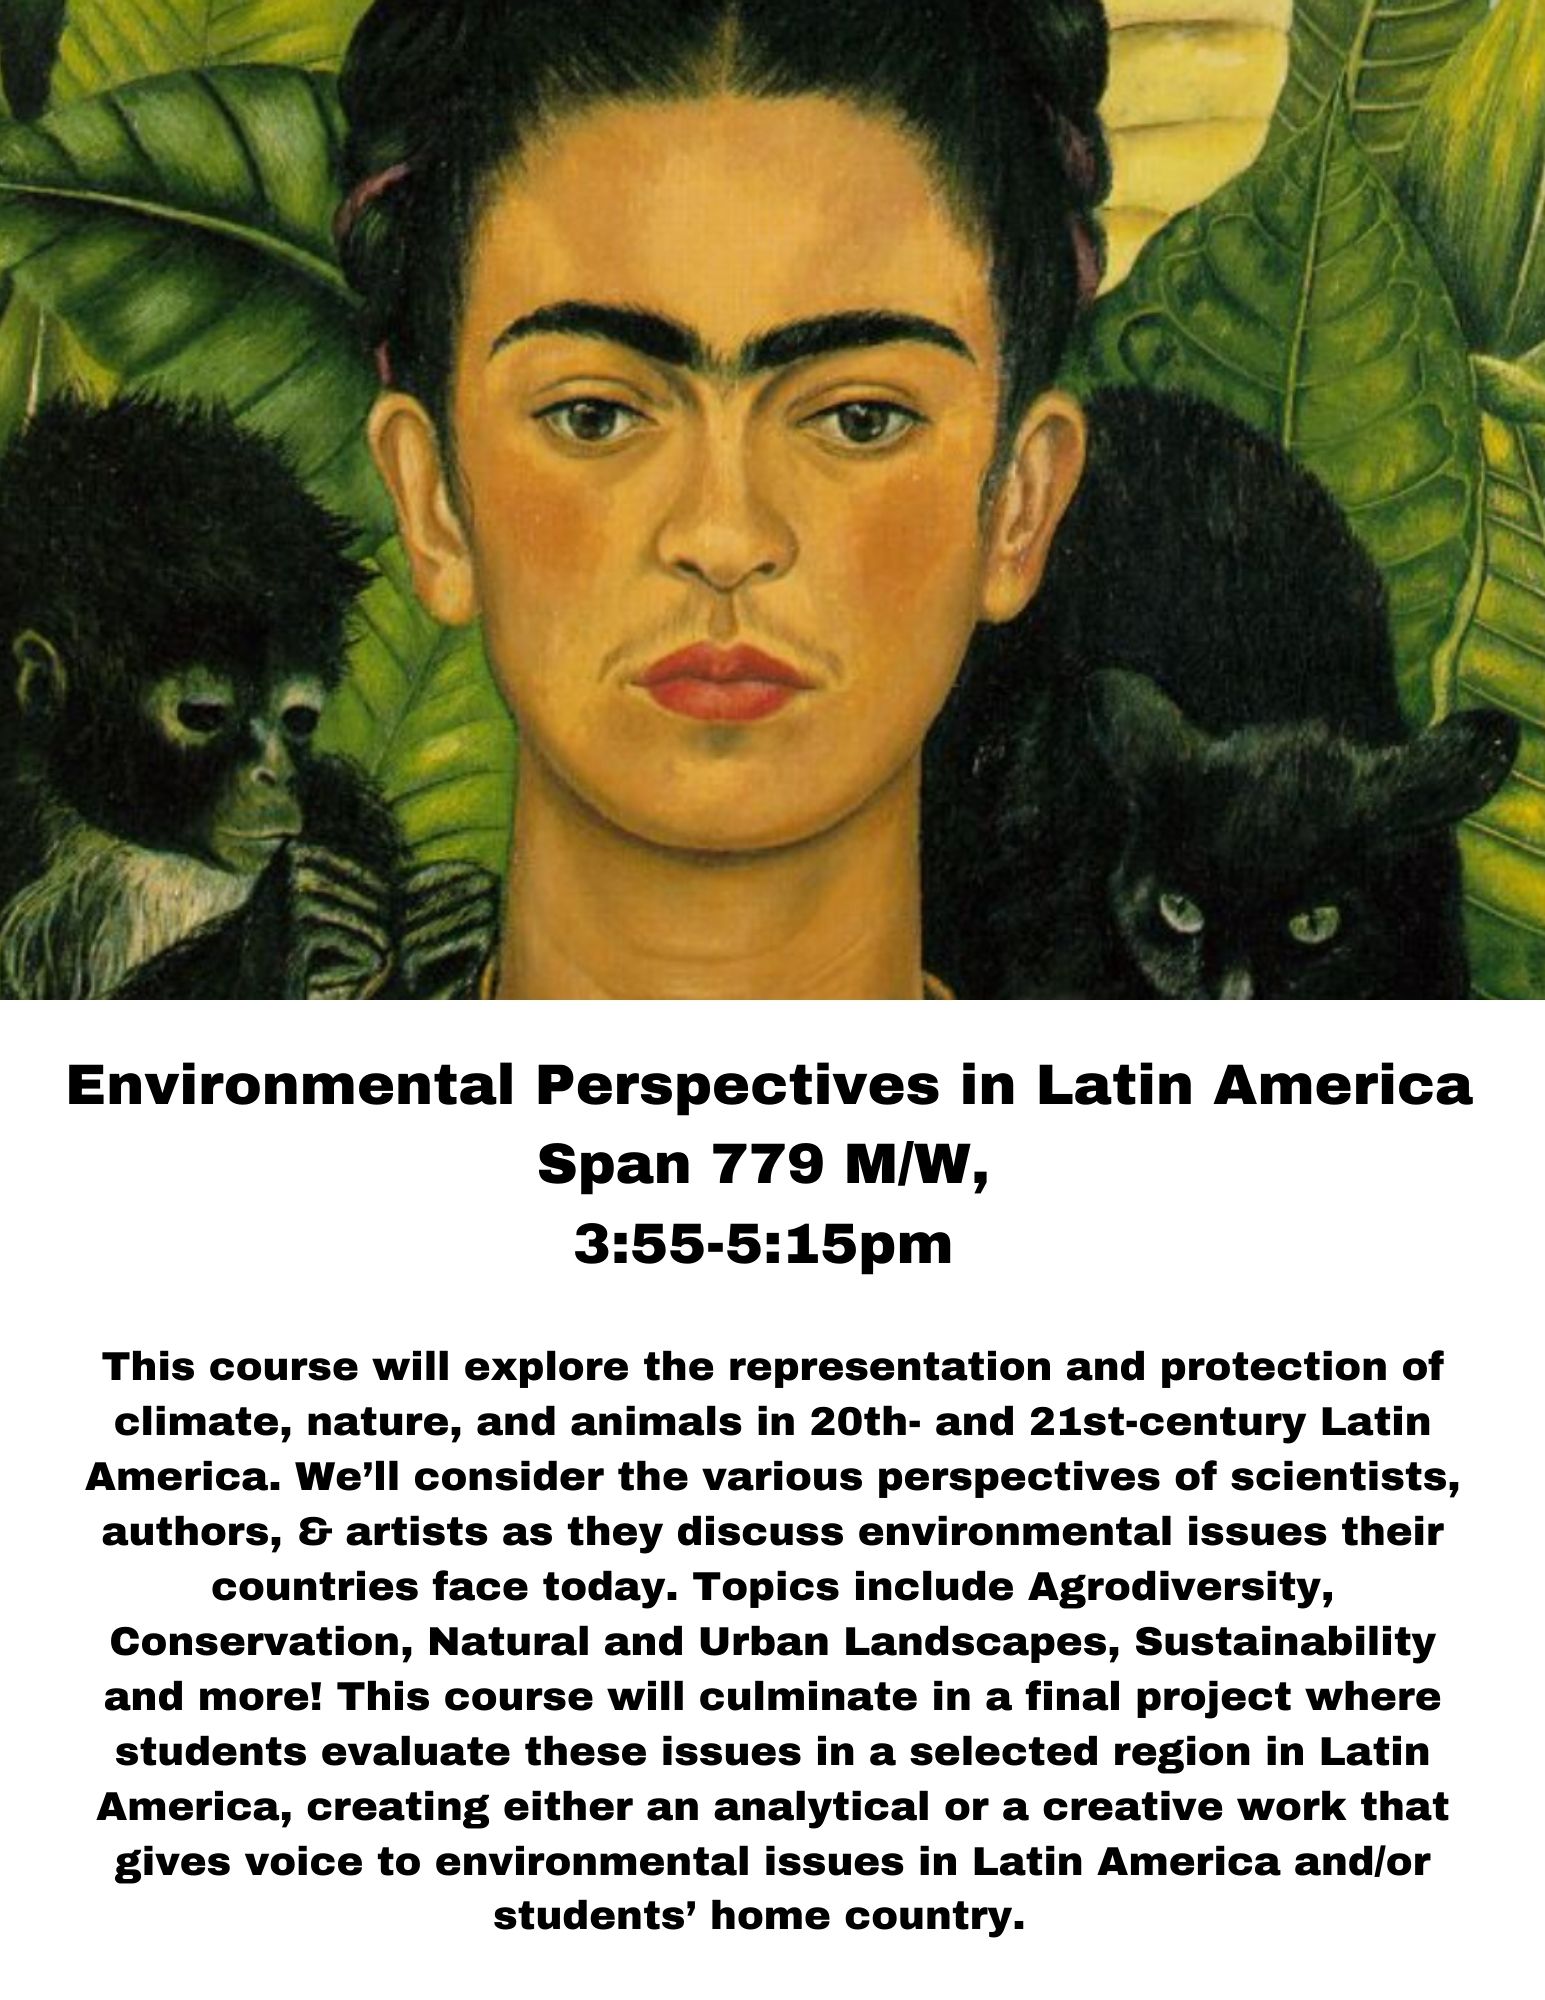 Environmental Perspectives in Latin America  Span 779 M/W,  3:55-5:15pm   This course will explore the representation and protection of climate, nature, and animals in 20th- and 21st-century Latin America. We’ll consider the various perspectives of scientists, authors, & artists as they discuss environmental issues their countries face today. Topics include Agrodiversity, Conservation, Natural and Urban Landscapes, Sustainability and more! This course will culminate in a final project where students evaluate these issues in a selected region in Latin America, creating either an analytical or a creative work that gives voice to environmental issues in Latin America and/or students’ home country.